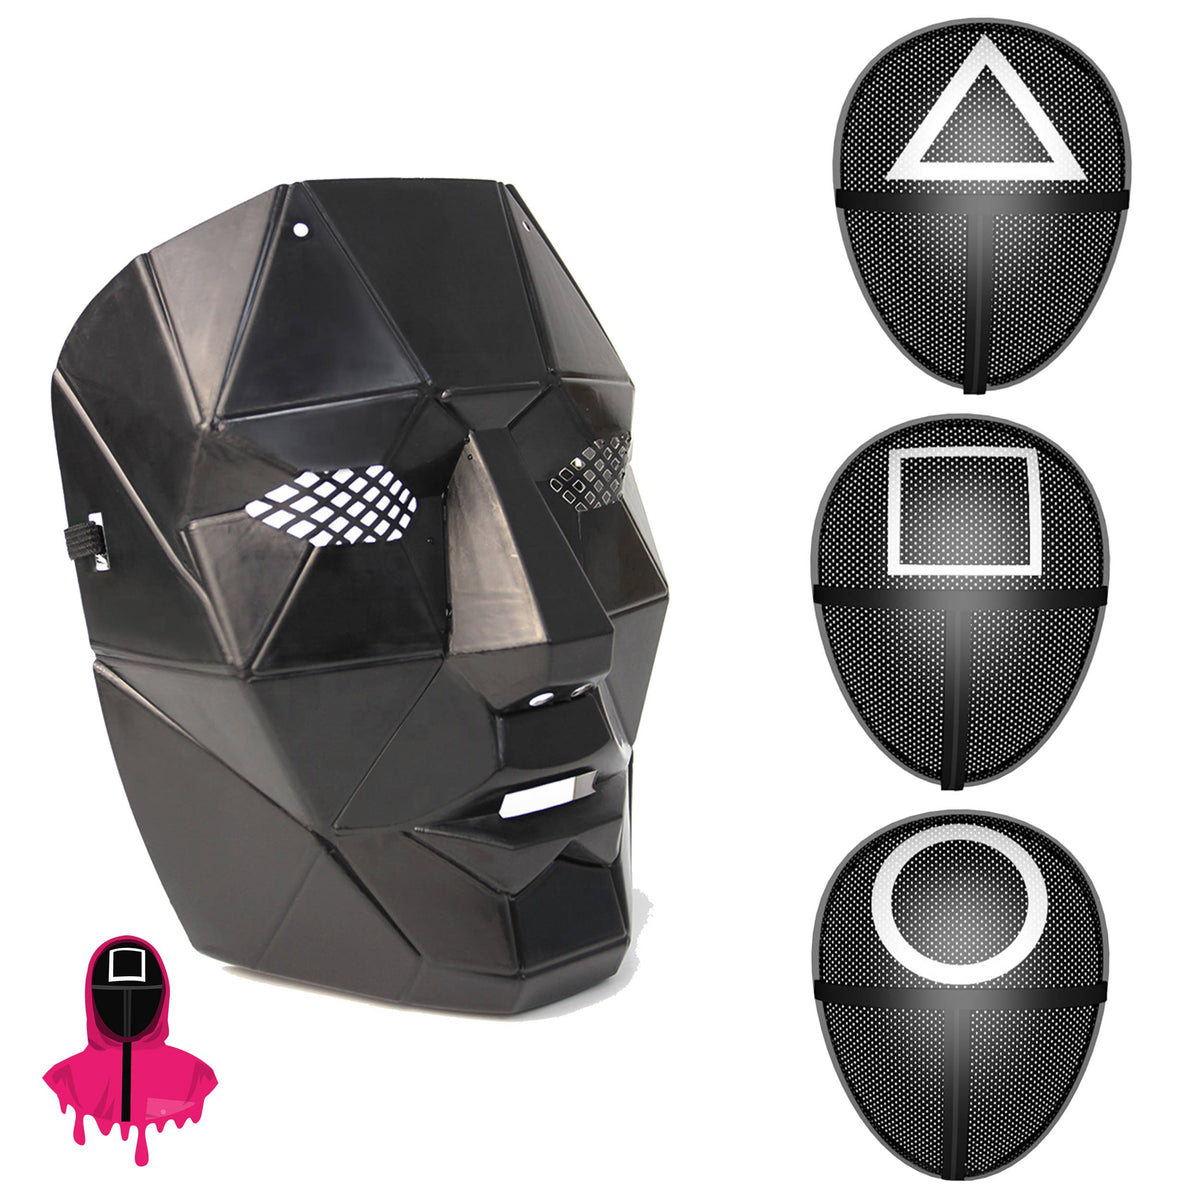 Black structured face mask with mesh over eyes. There are three options of mesh face masks that come in the set